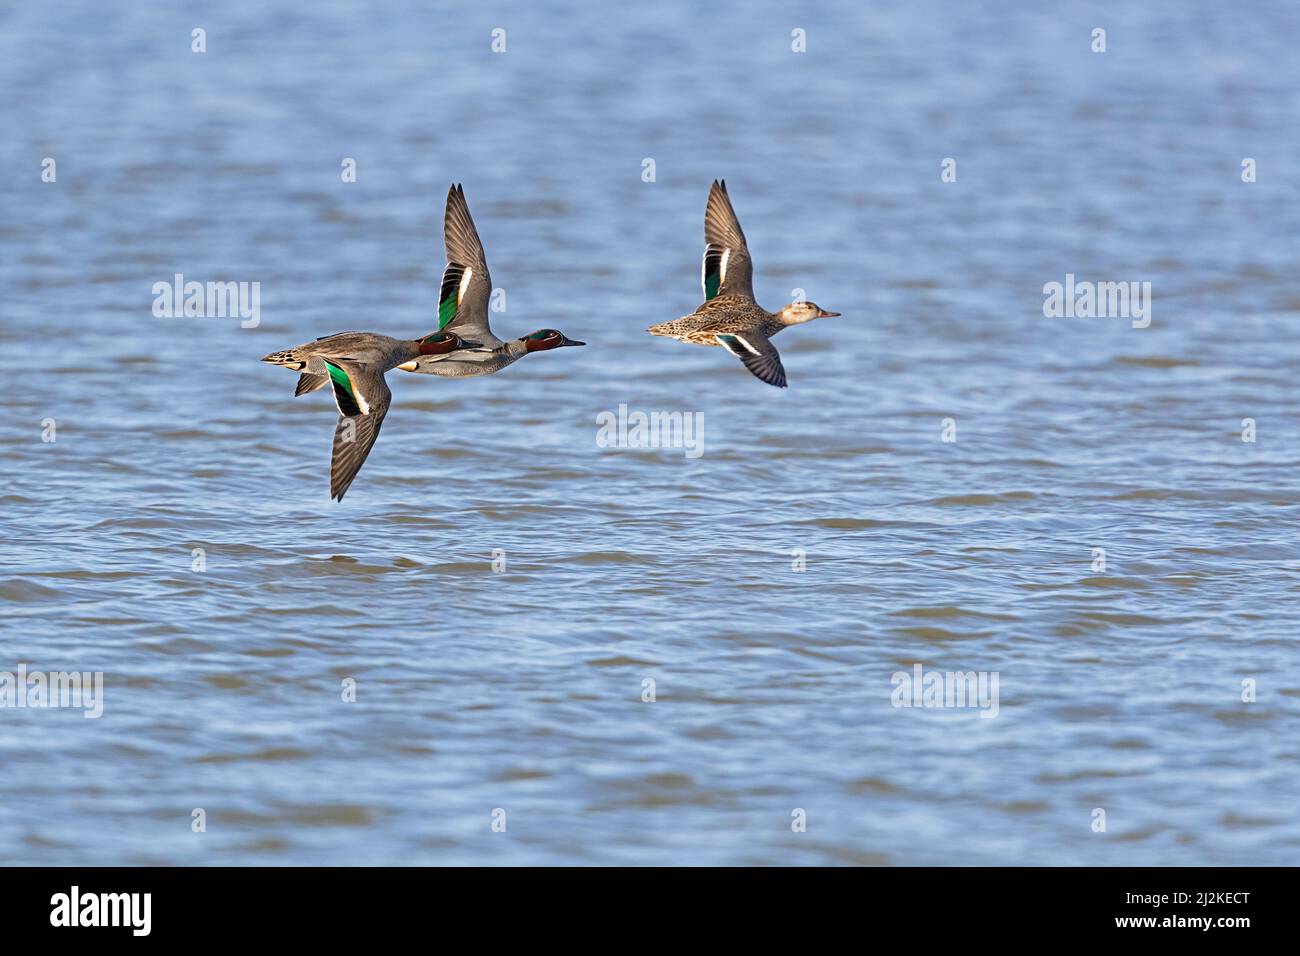 Flying male and female Eurasian Teals (Anas crecca) photographed against water. Stock Photo